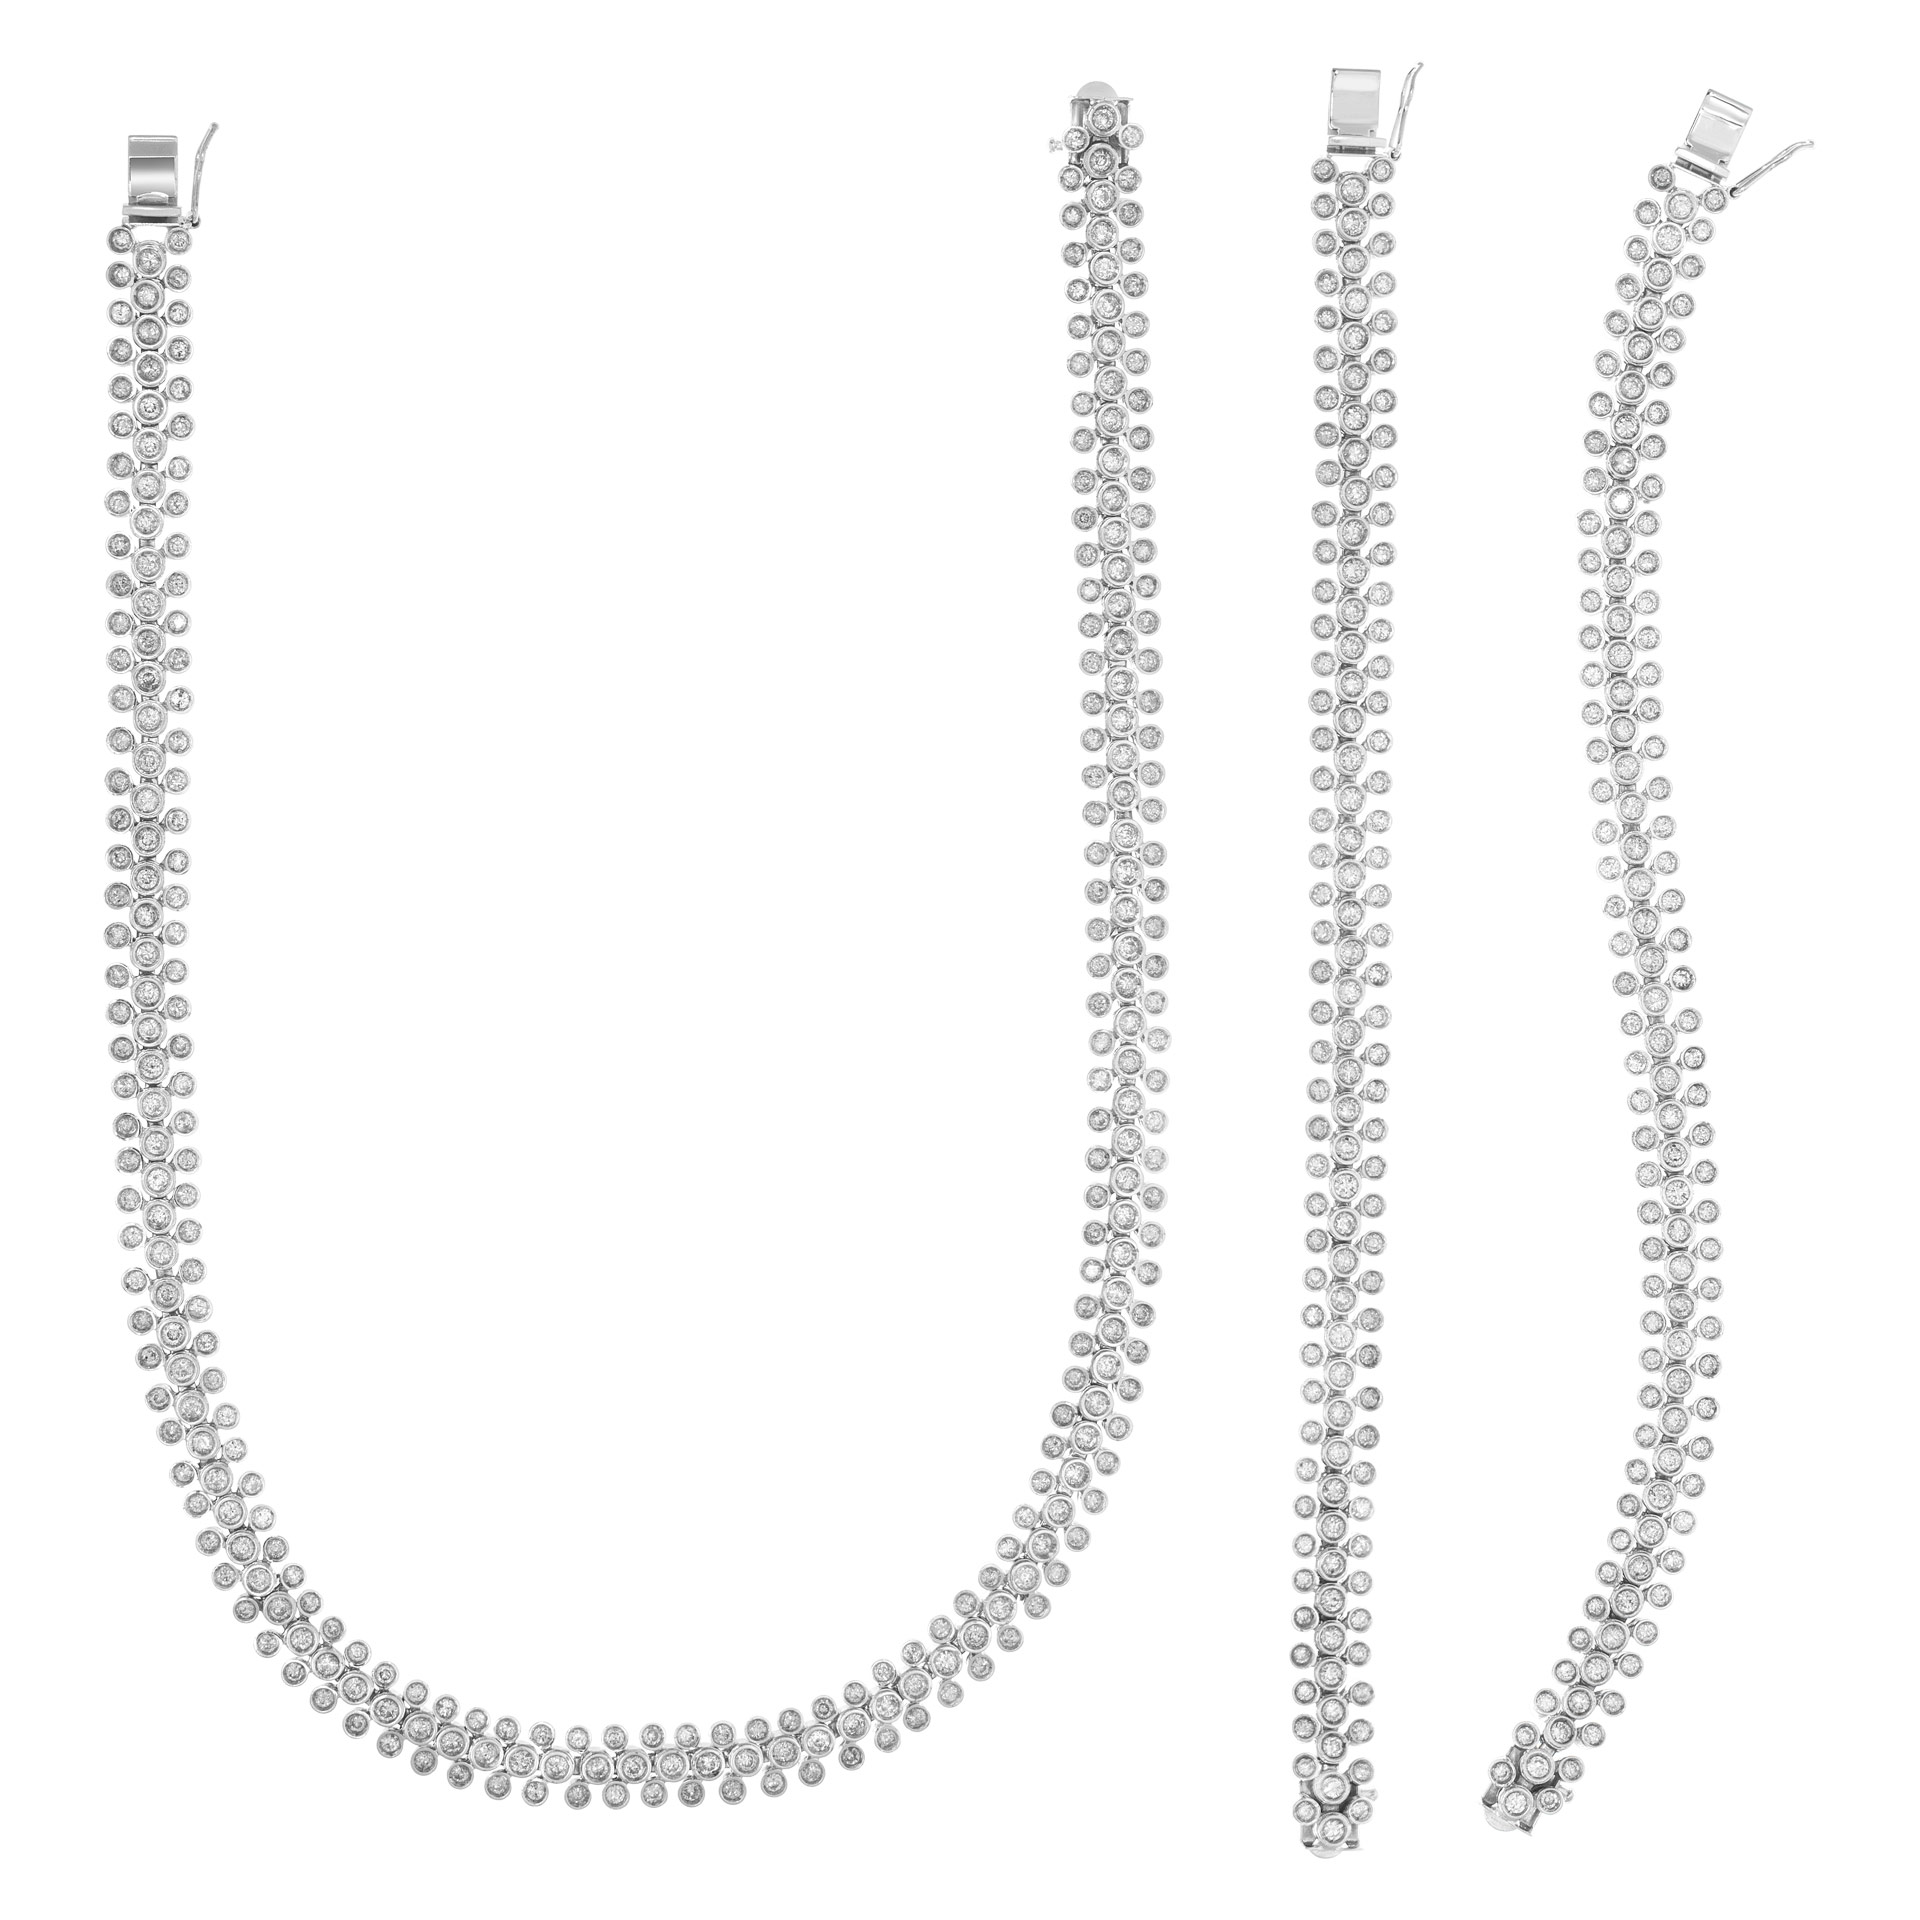 Diamond necklace and double bracelet set with 22.50 carats in diamonds image 1